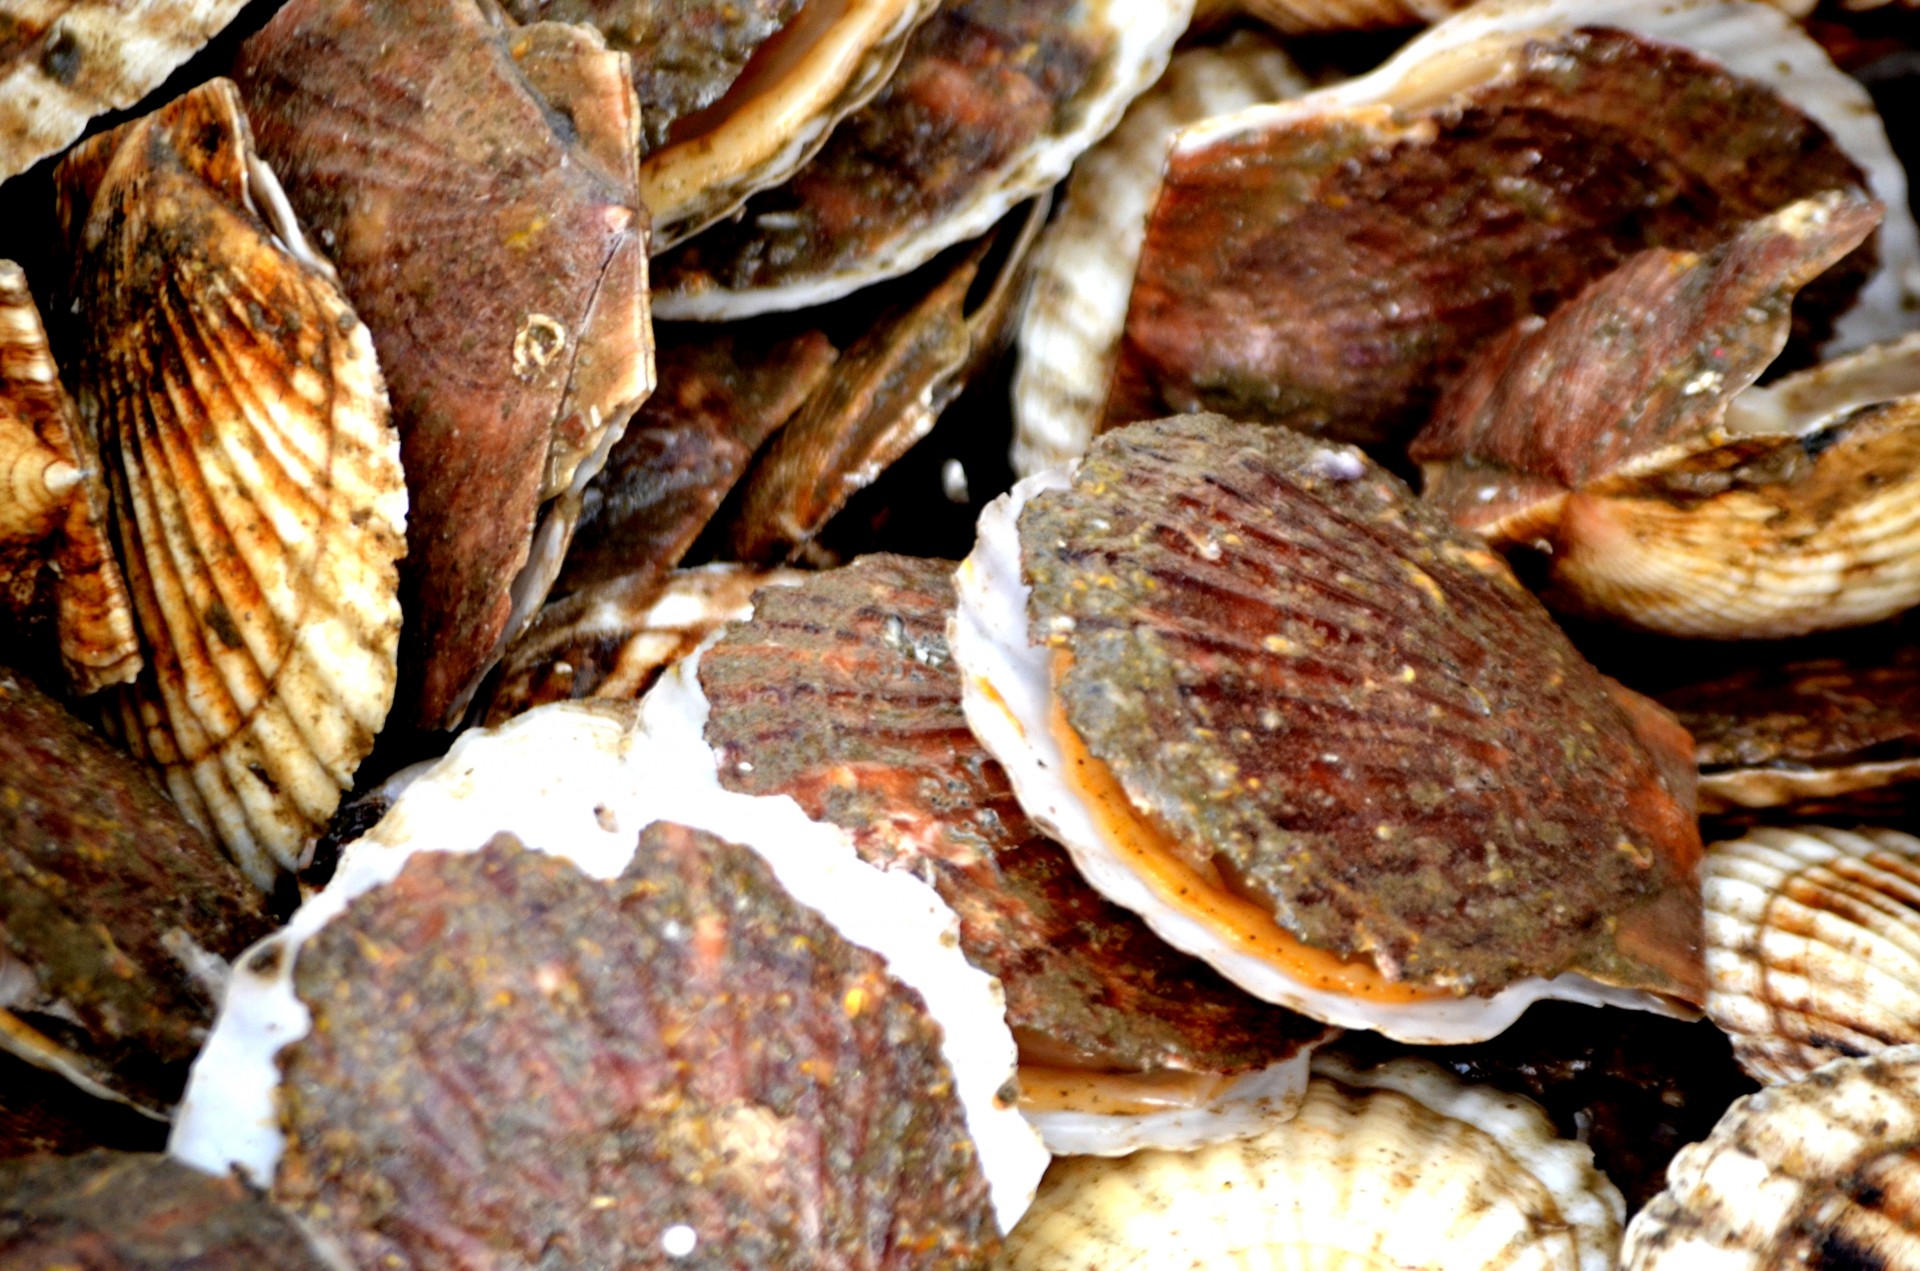 scallop shells at the seafood market